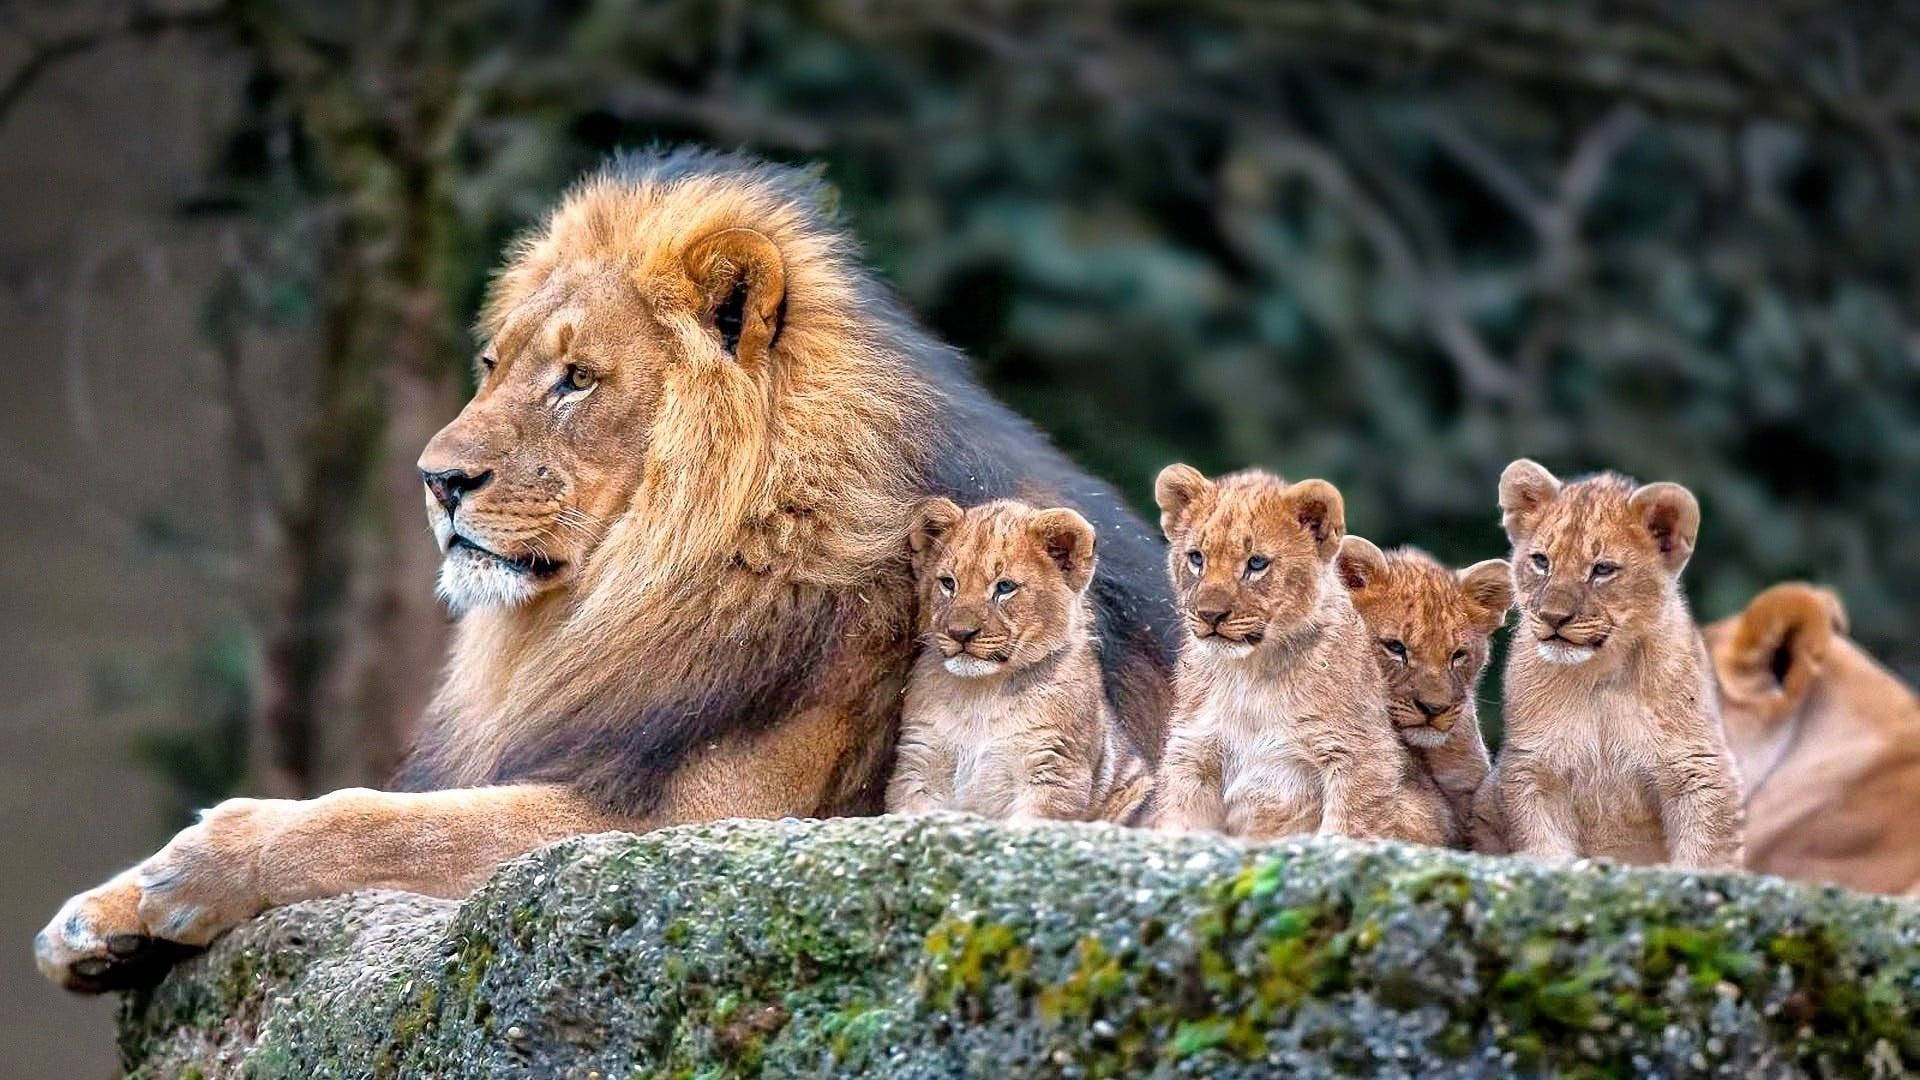 Lion With His Baby Animals Wallpaper